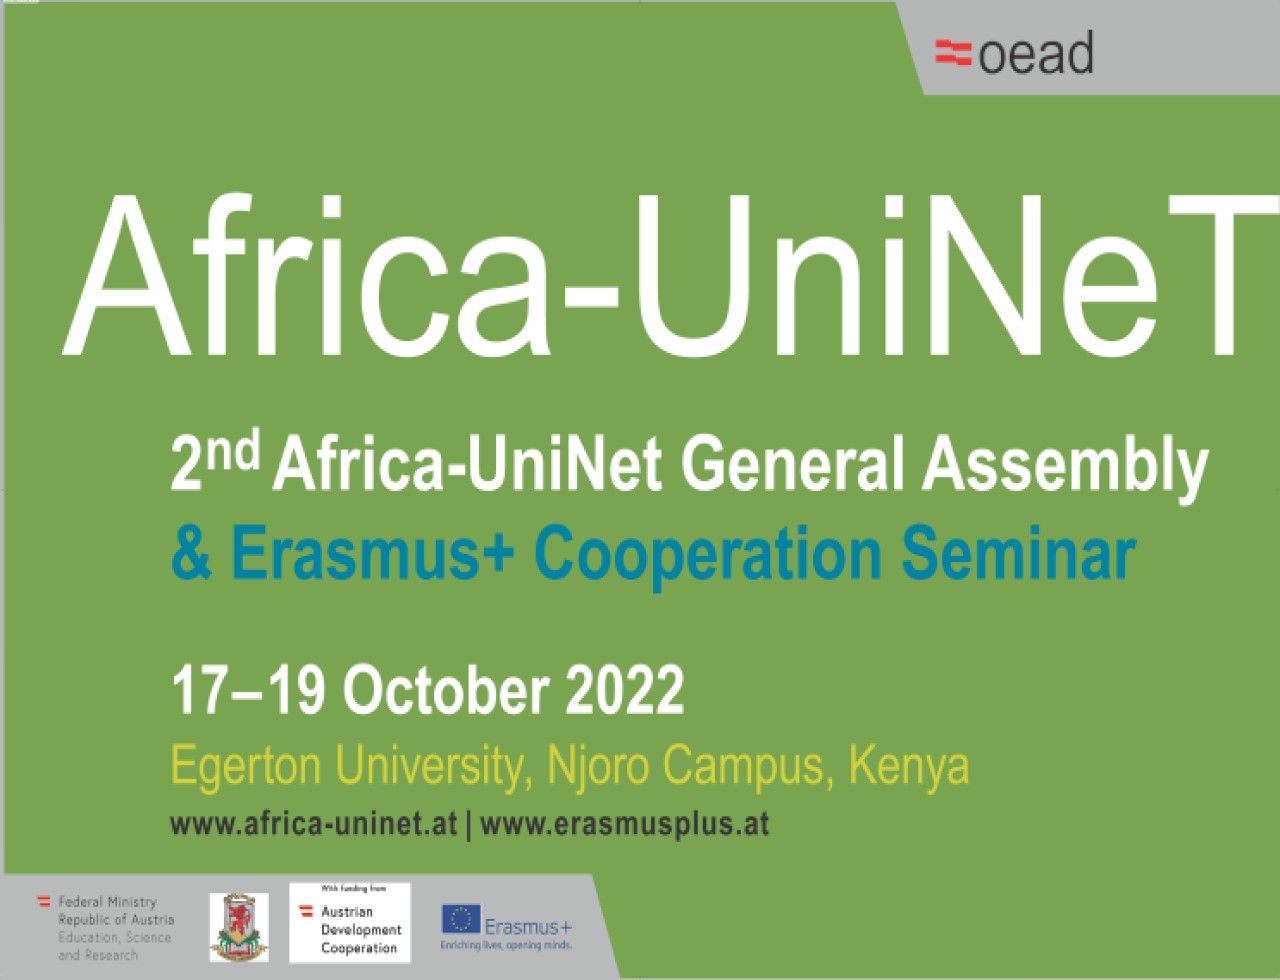 2nd Africa-UniNet General Assembly